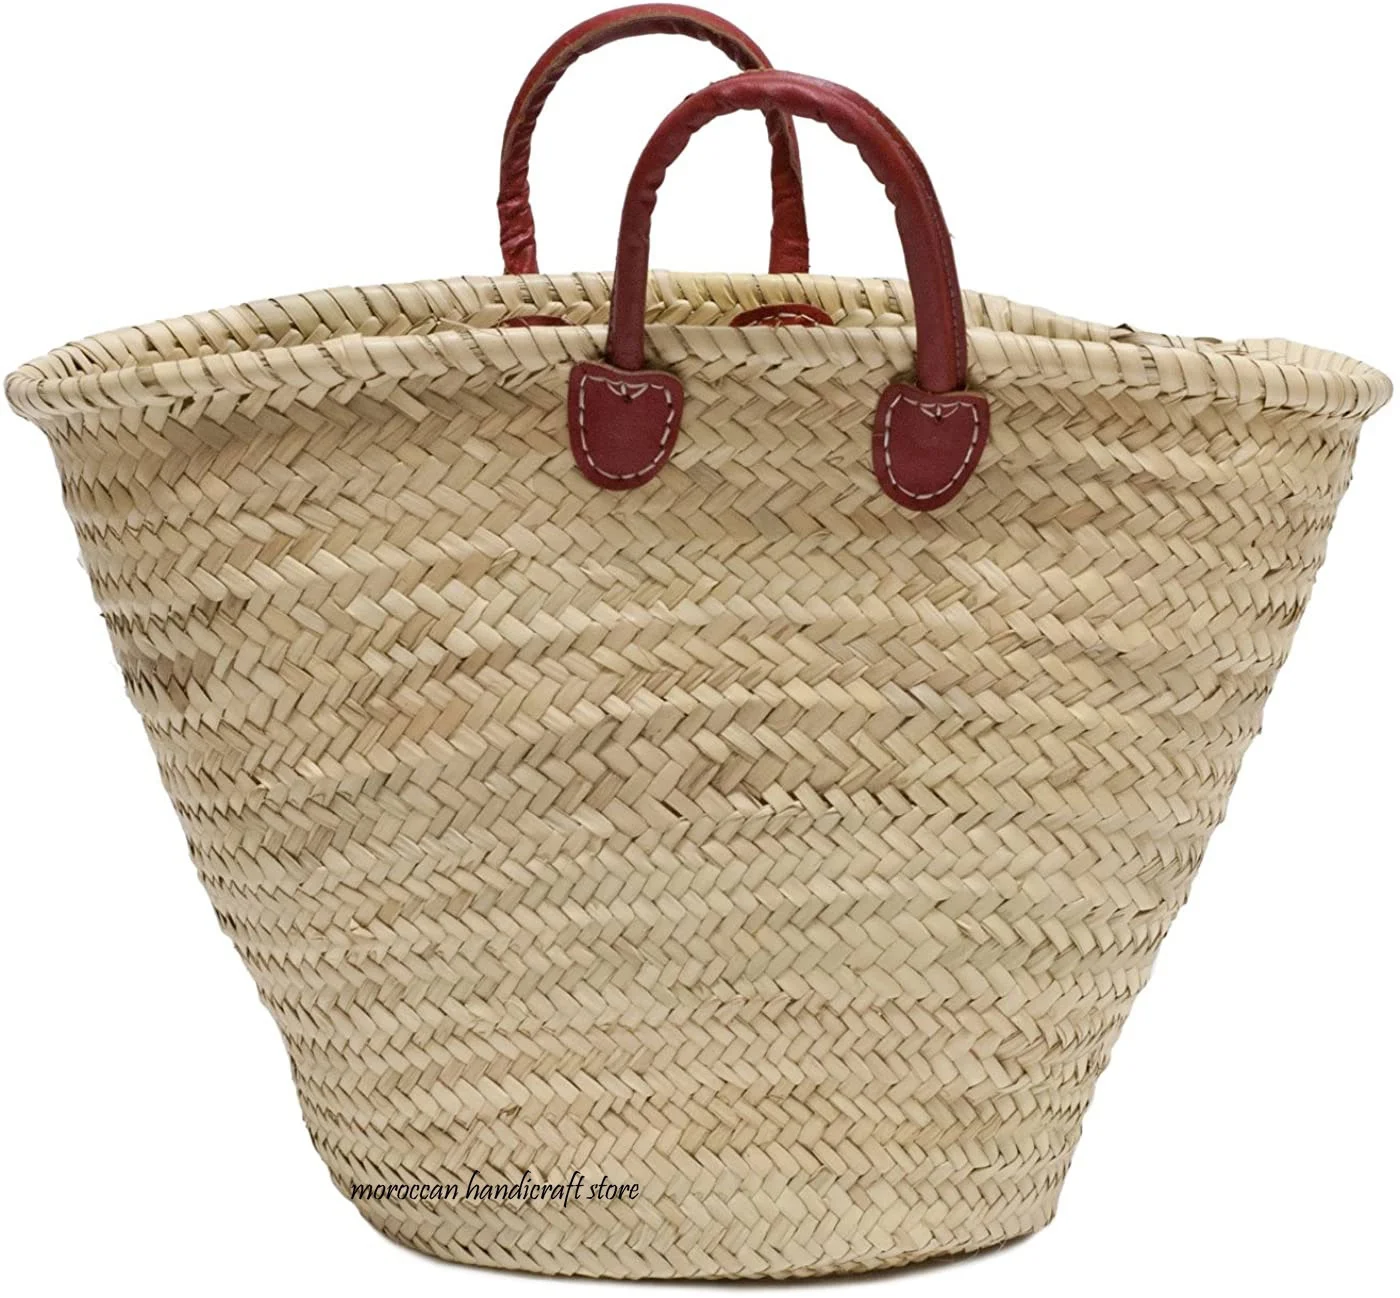 Rattan Woven Beach Tote Bag Large Capacity Woven Bag With 